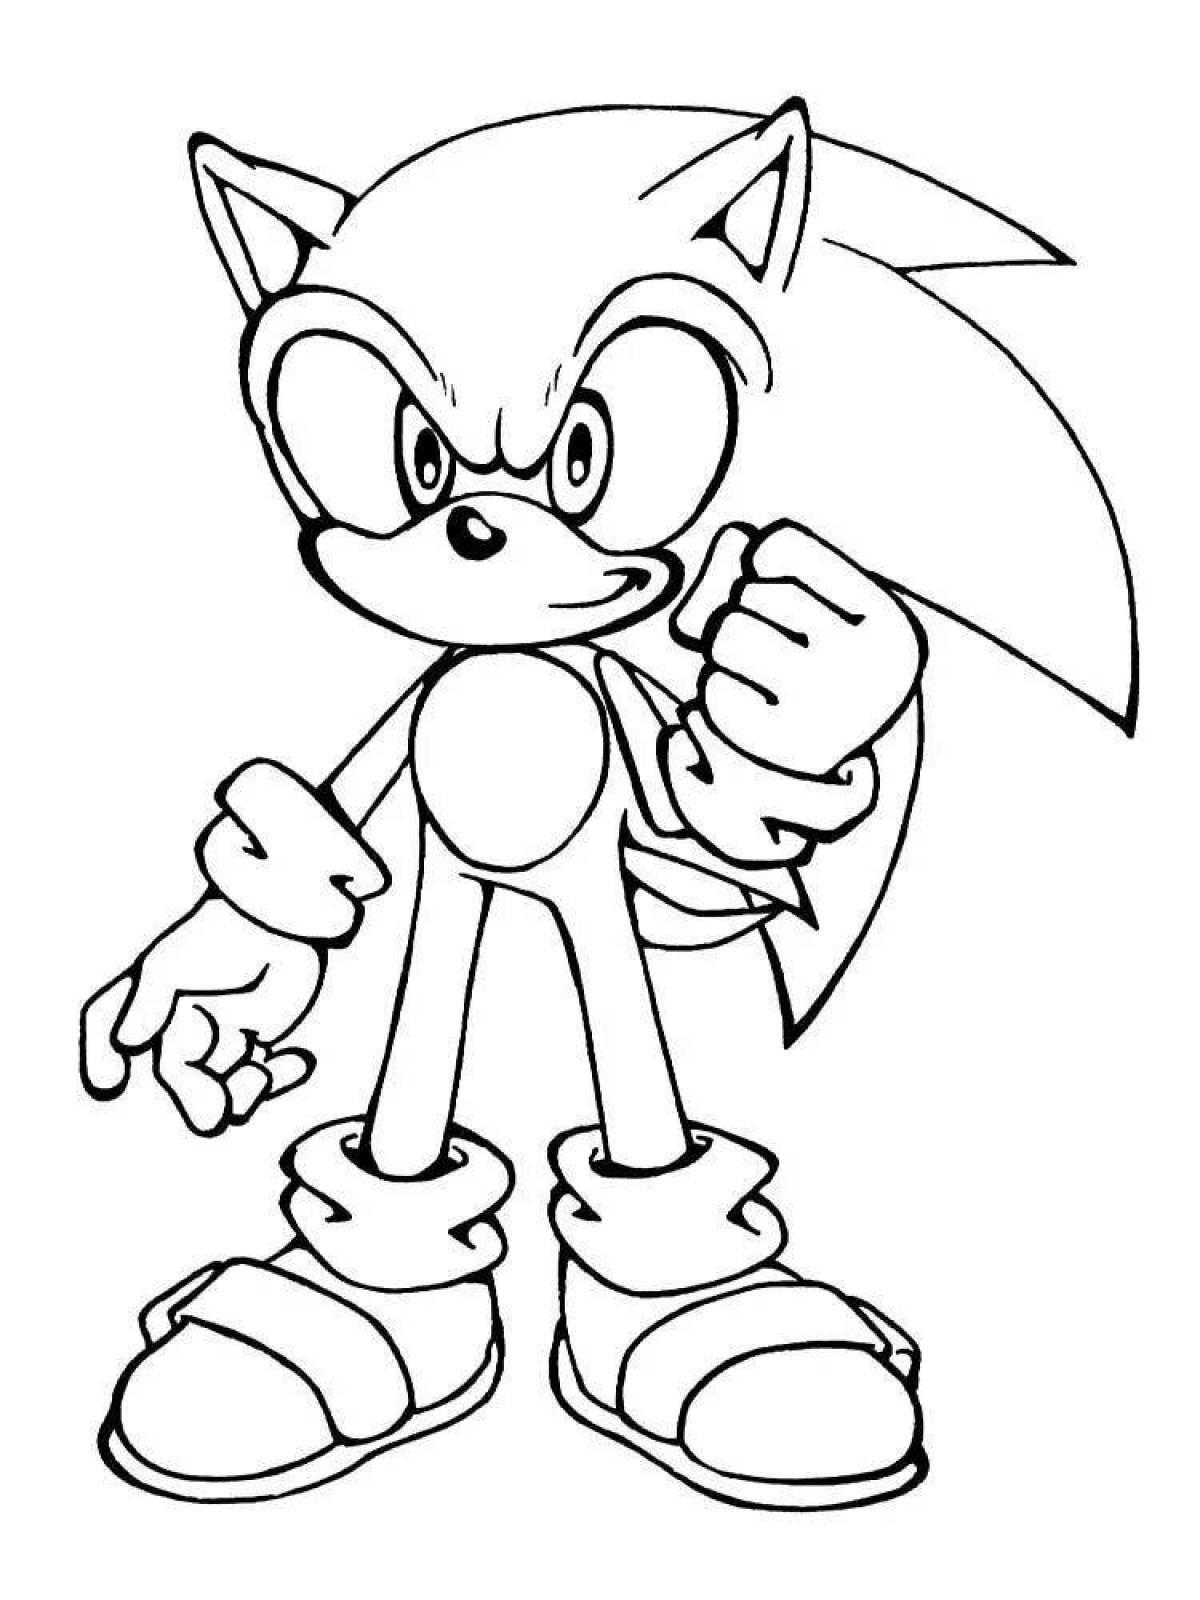 Xs sonic weird coloring